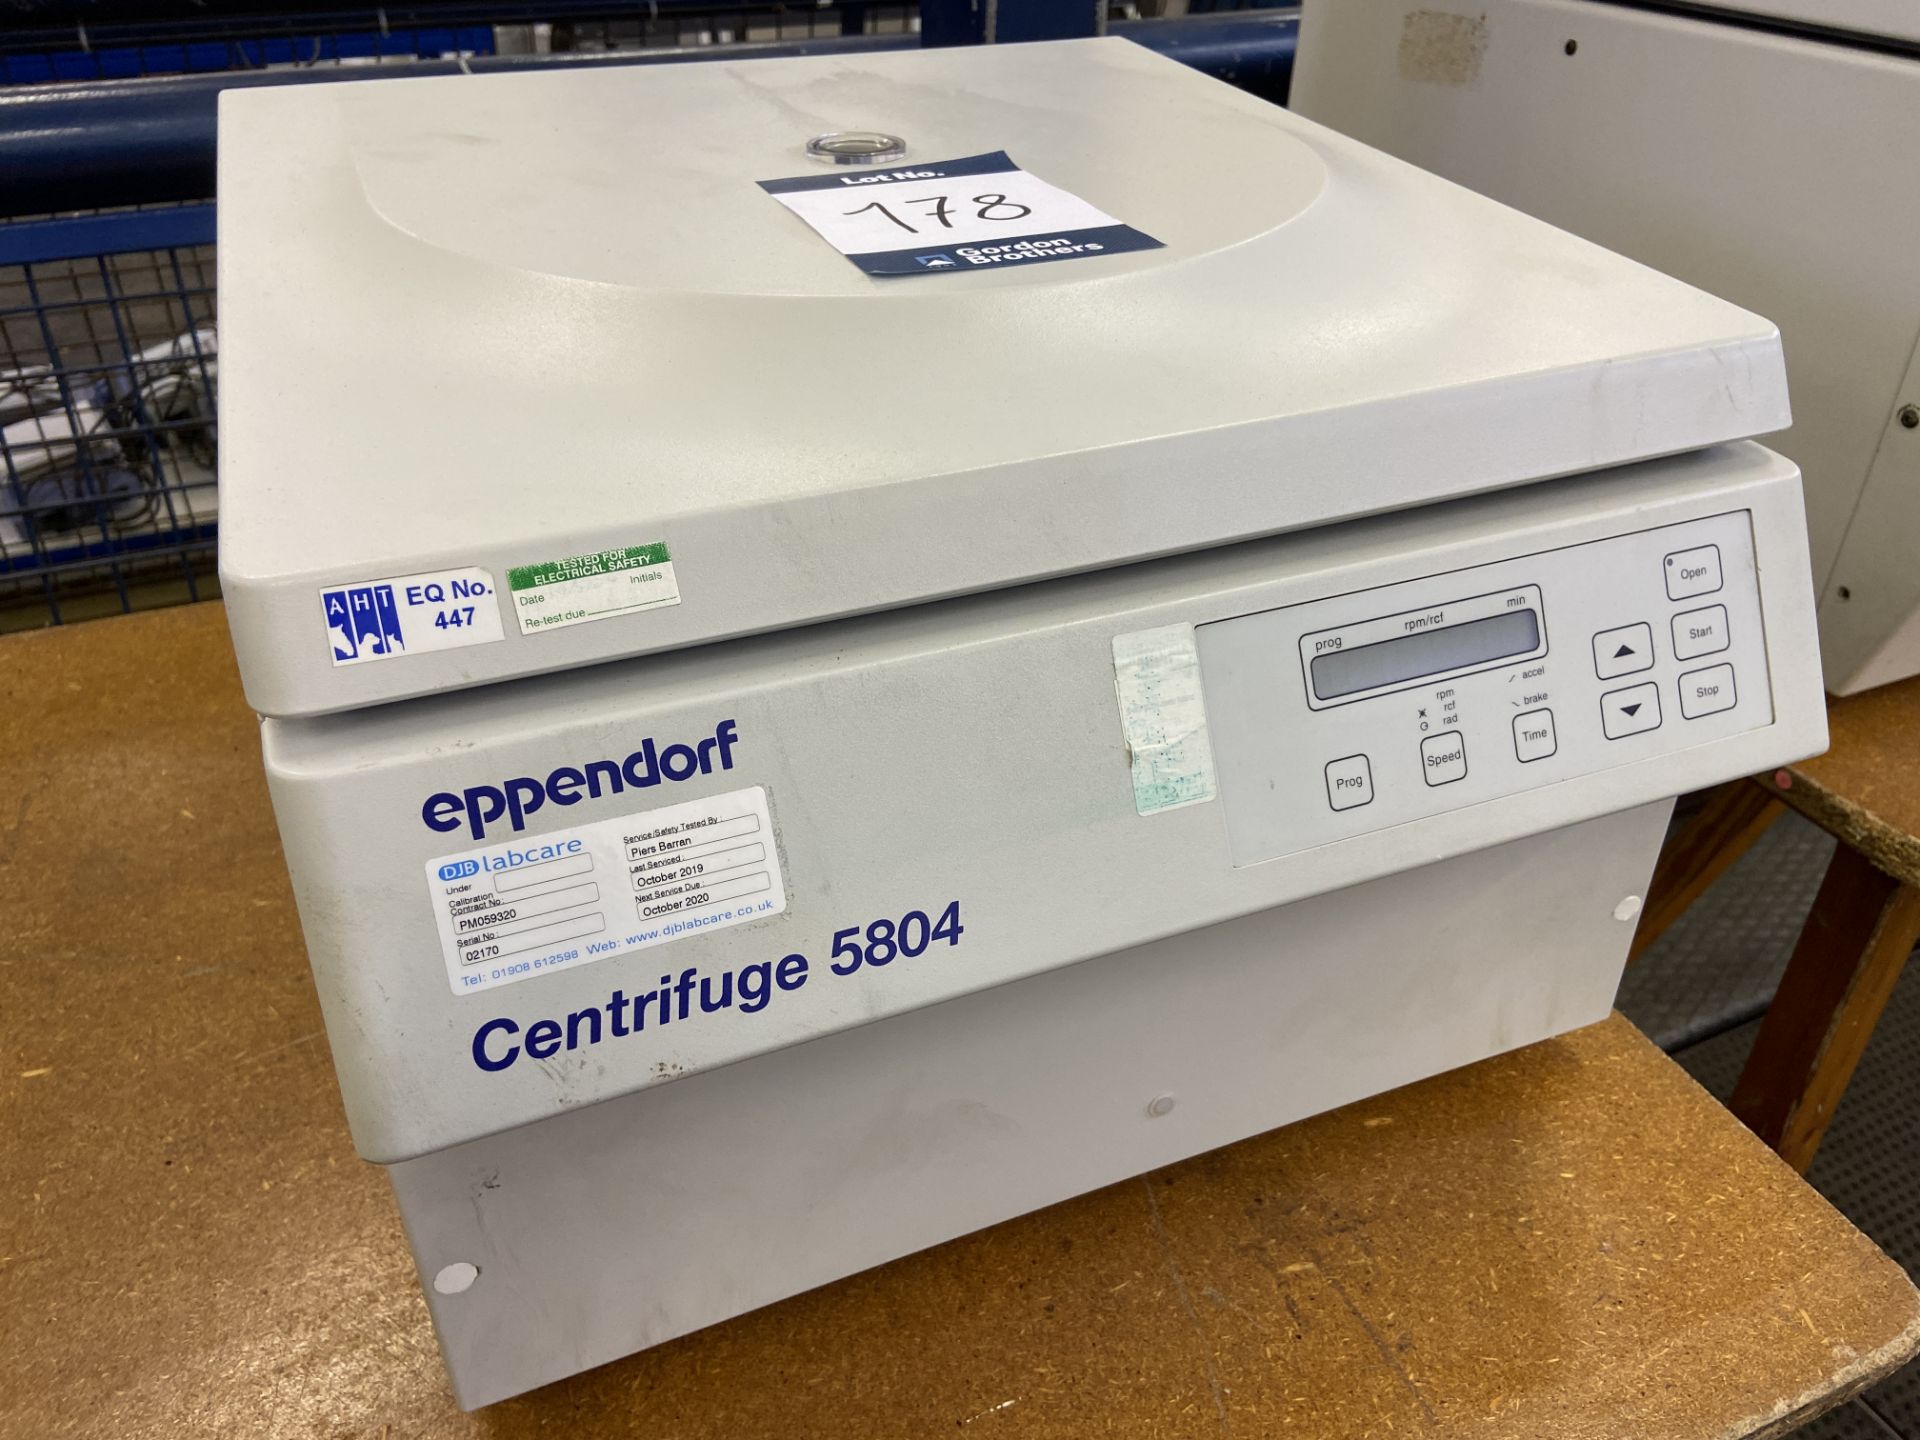 Eppendorf 5804 benchtop centrifuge, Serial No. 02707 (2001) with 240v power cable